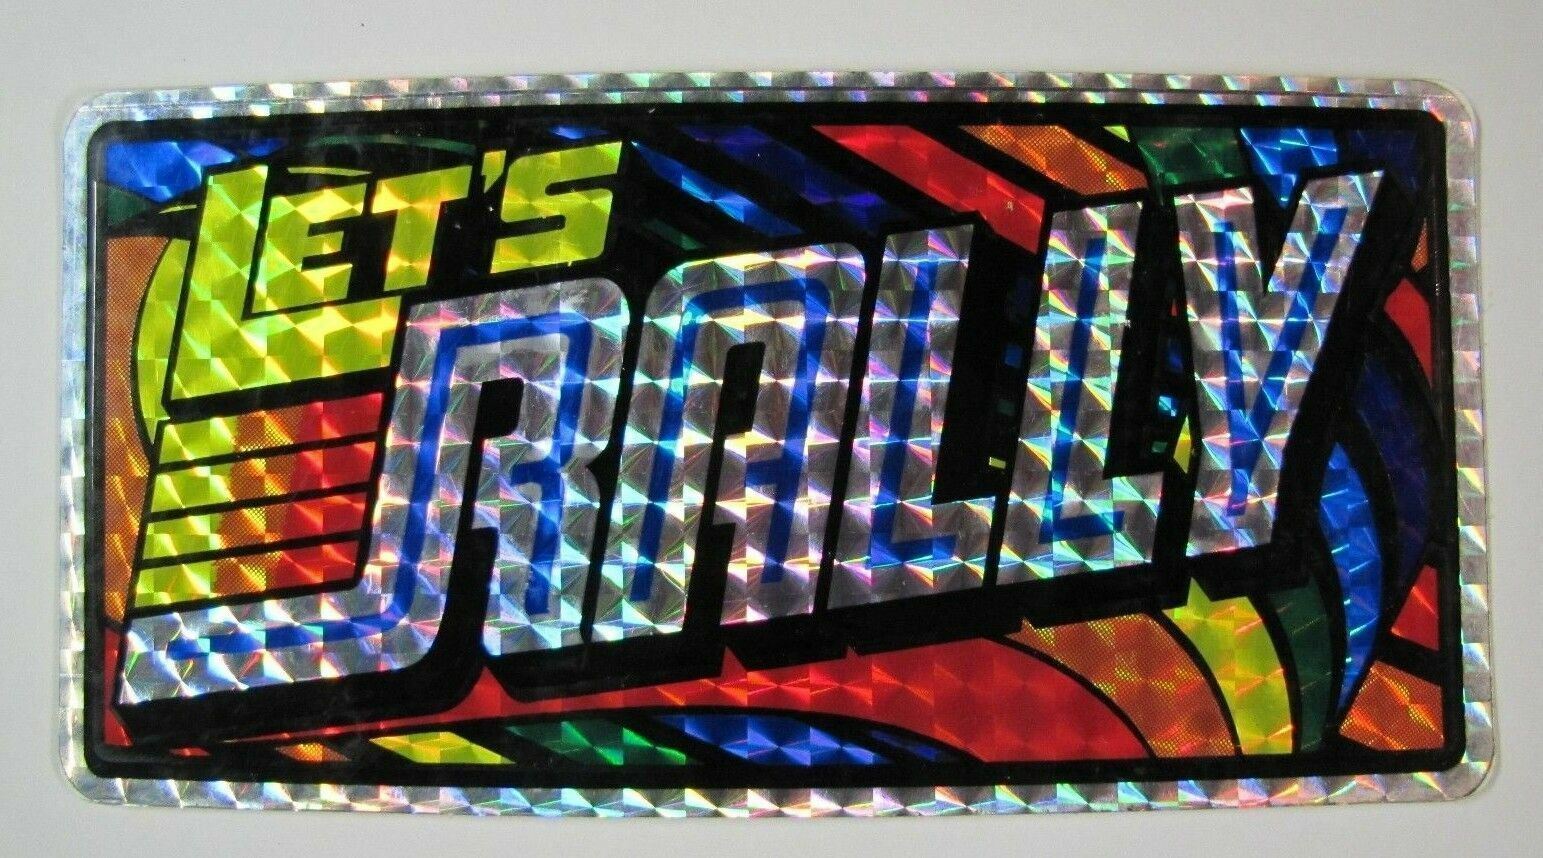 1970s LET'S RALLY Holographic Reflective Vanity License Plate Sign Auto Truck